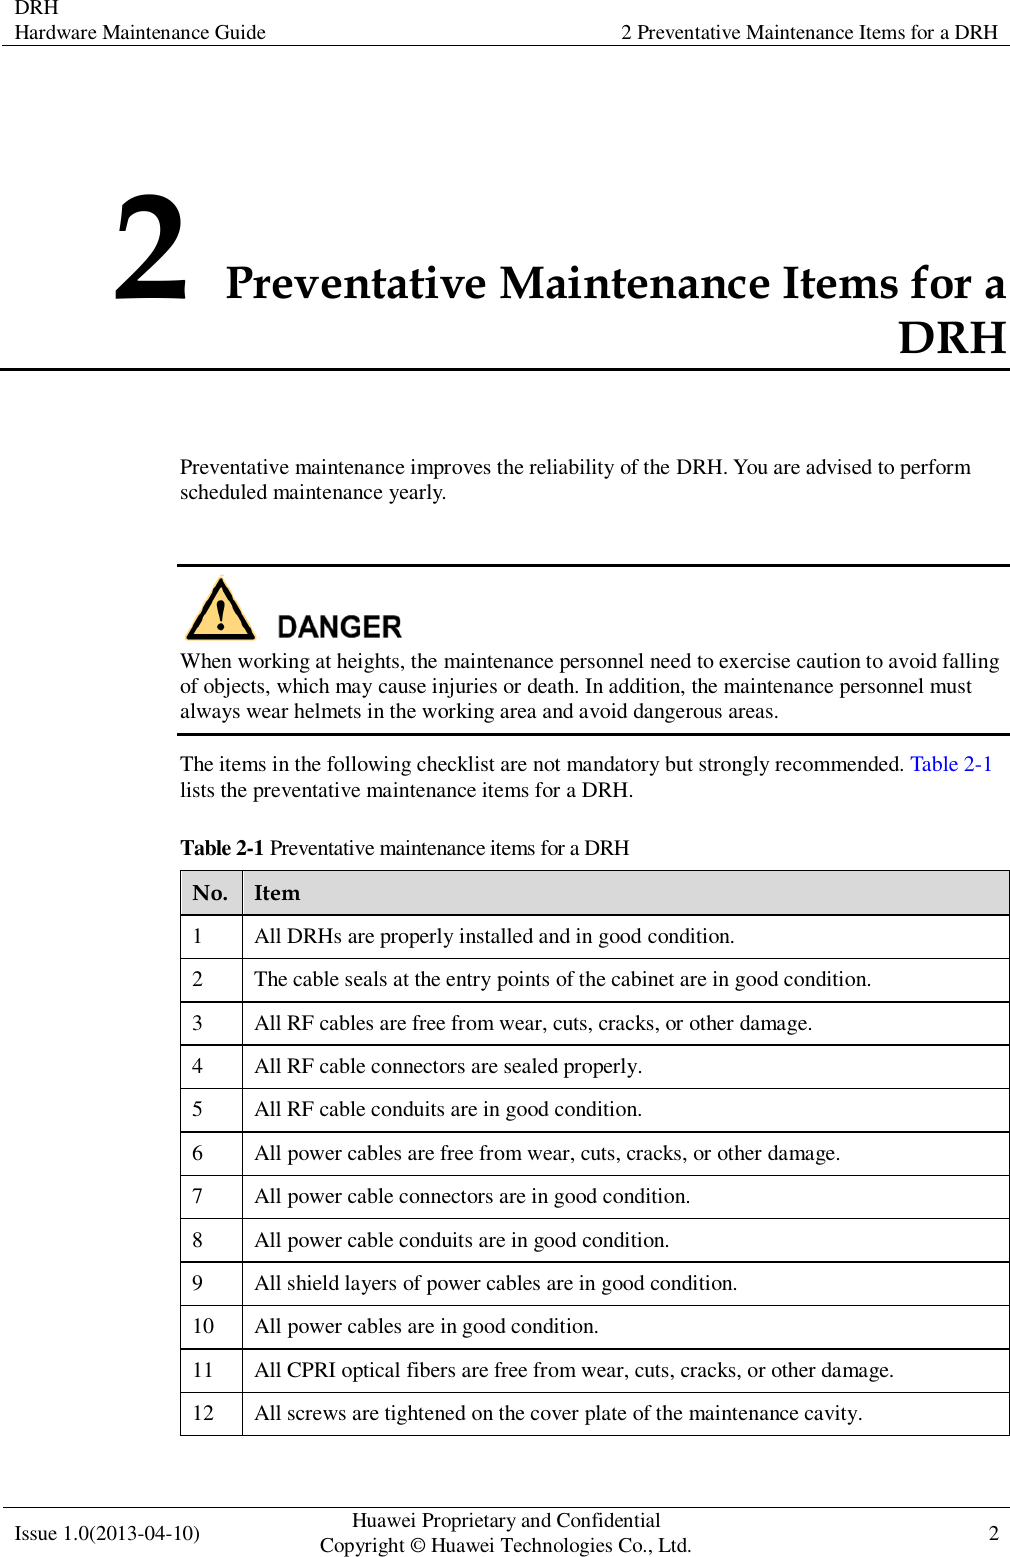  DRH Hardware Maintenance Guide   2 Preventative Maintenance Items for a DRH  Issue 1.0(2013-04-10) Huawei Proprietary and Confidential                                     Copyright © Huawei Technologies Co., Ltd. 2    2 Preventative Maintenance Items for a DRH Preventative maintenance improves the reliability of the DRH. You are advised to perform scheduled maintenance yearly.   When working at heights, the maintenance personnel need to exercise caution to avoid falling of objects, which may cause injuries or death. In addition, the maintenance personnel must always wear helmets in the working area and avoid dangerous areas. The items in the following checklist are not mandatory but strongly recommended. Table 2-1 lists the preventative maintenance items for a DRH. Table 2-1 Preventative maintenance items for a DRH No. Item 1 All DRHs are properly installed and in good condition. 2 The cable seals at the entry points of the cabinet are in good condition. 3 All RF cables are free from wear, cuts, cracks, or other damage. 4 All RF cable connectors are sealed properly. 5 All RF cable conduits are in good condition. 6 All power cables are free from wear, cuts, cracks, or other damage. 7 All power cable connectors are in good condition. 8 All power cable conduits are in good condition. 9 All shield layers of power cables are in good condition. 10 All power cables are in good condition. 11 All CPRI optical fibers are free from wear, cuts, cracks, or other damage. 12 All screws are tightened on the cover plate of the maintenance cavity. 